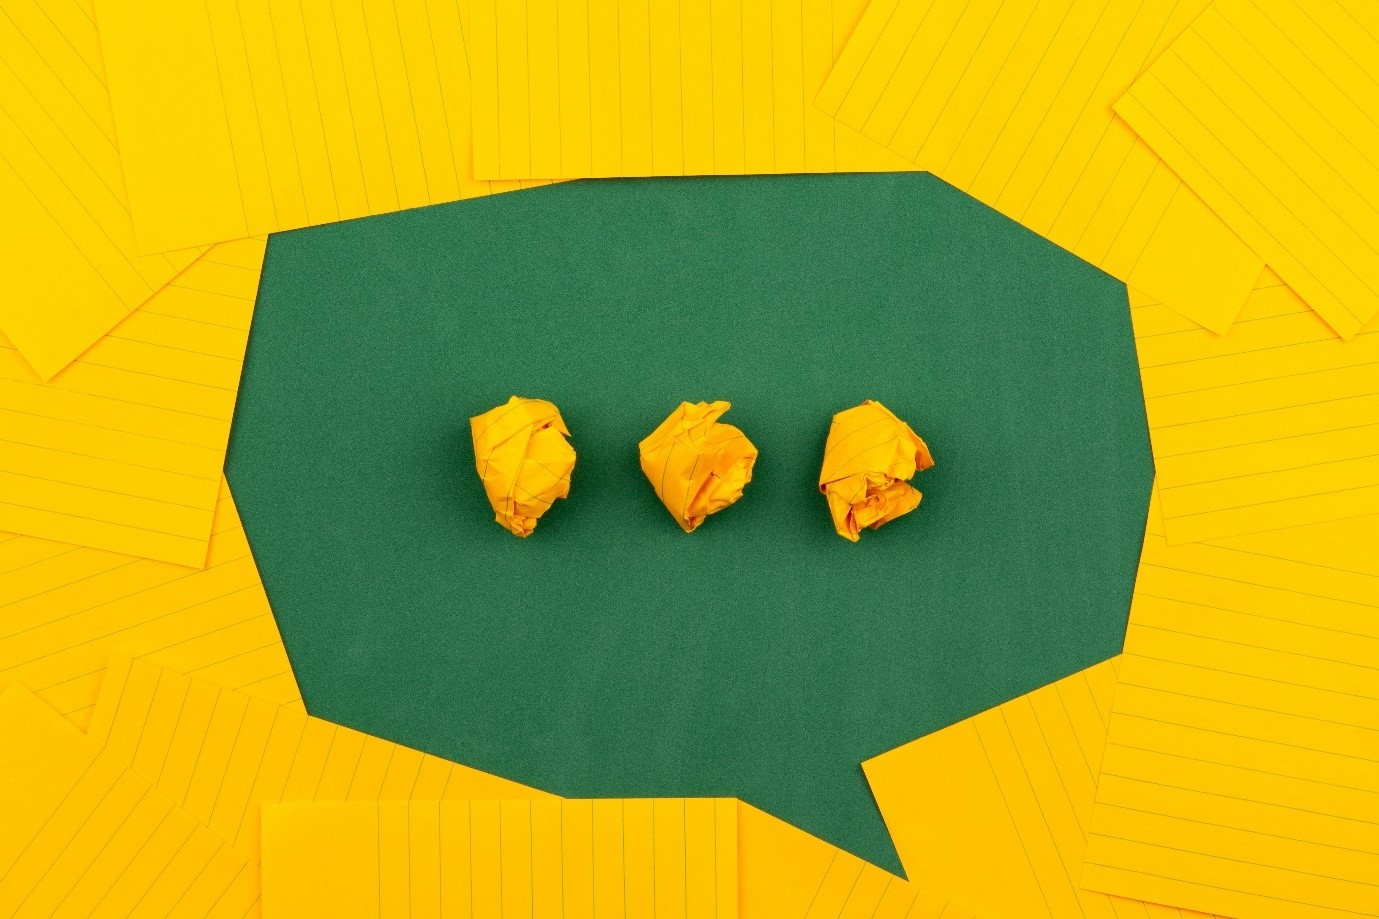 Image to represent communication. Yellow background, green speech bubble with three scrunched up pieces of yellow paper